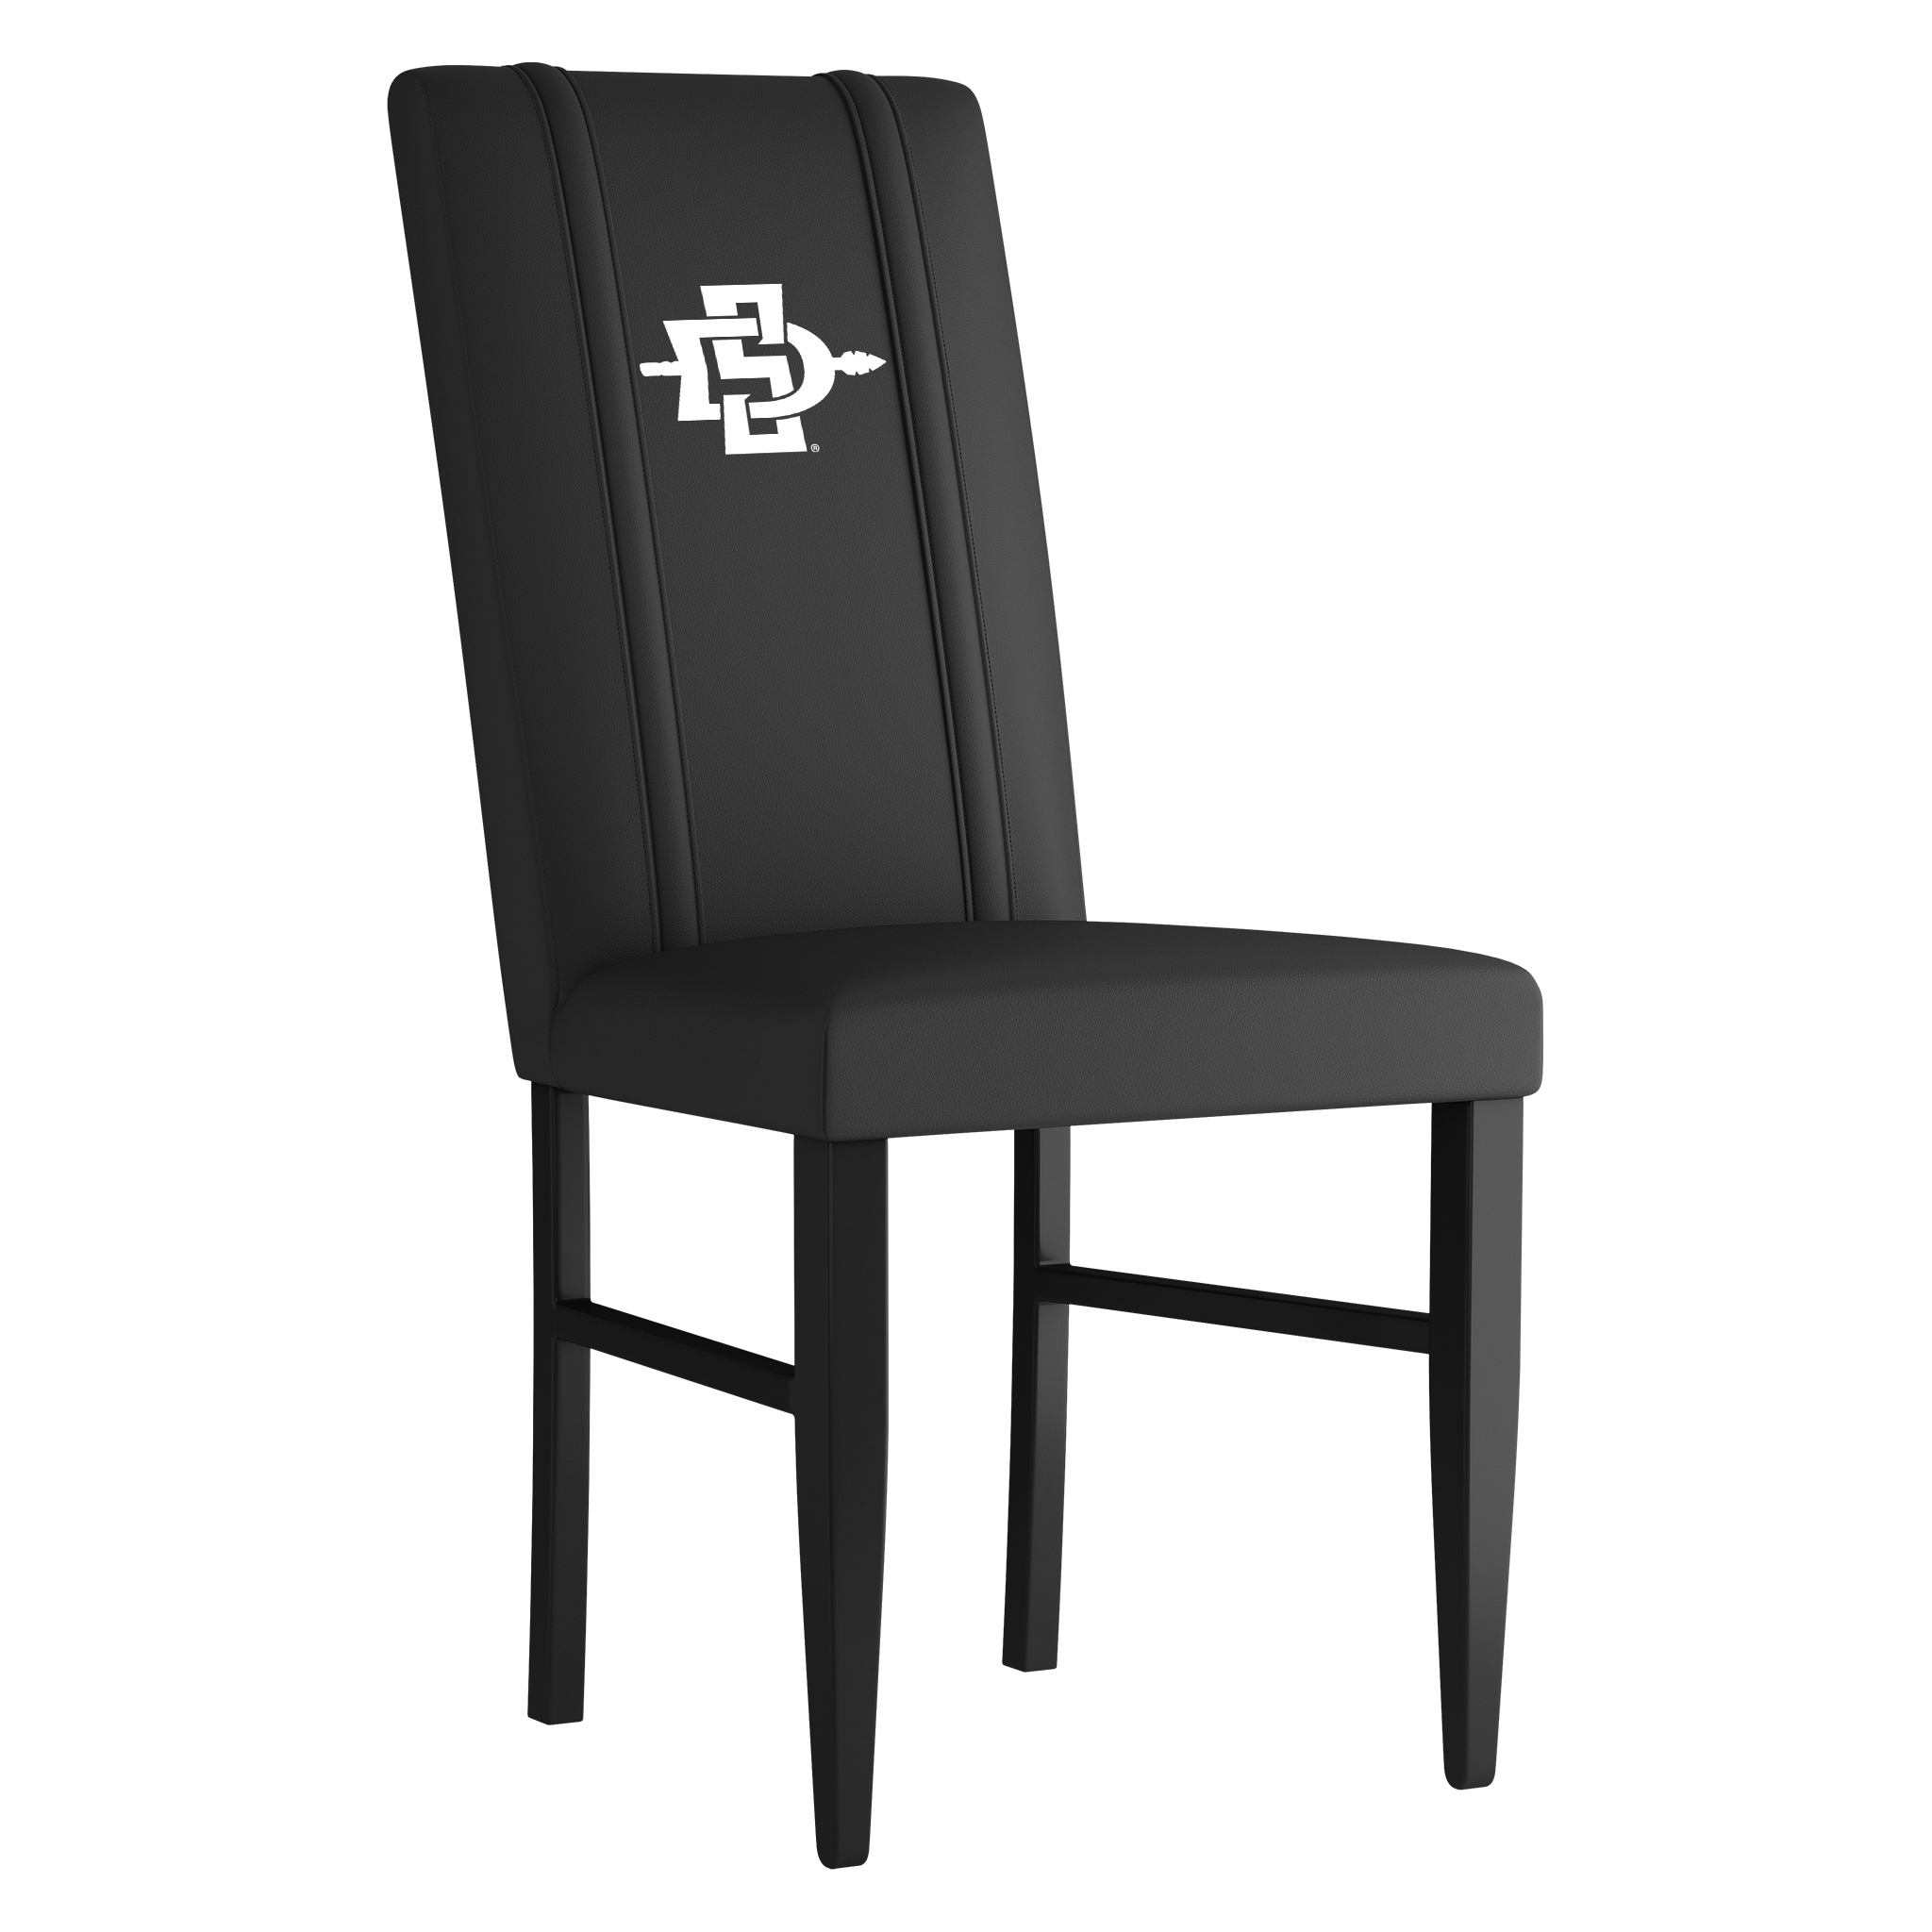 San Diego State Side Chair 2000 With San Diego State Alternate